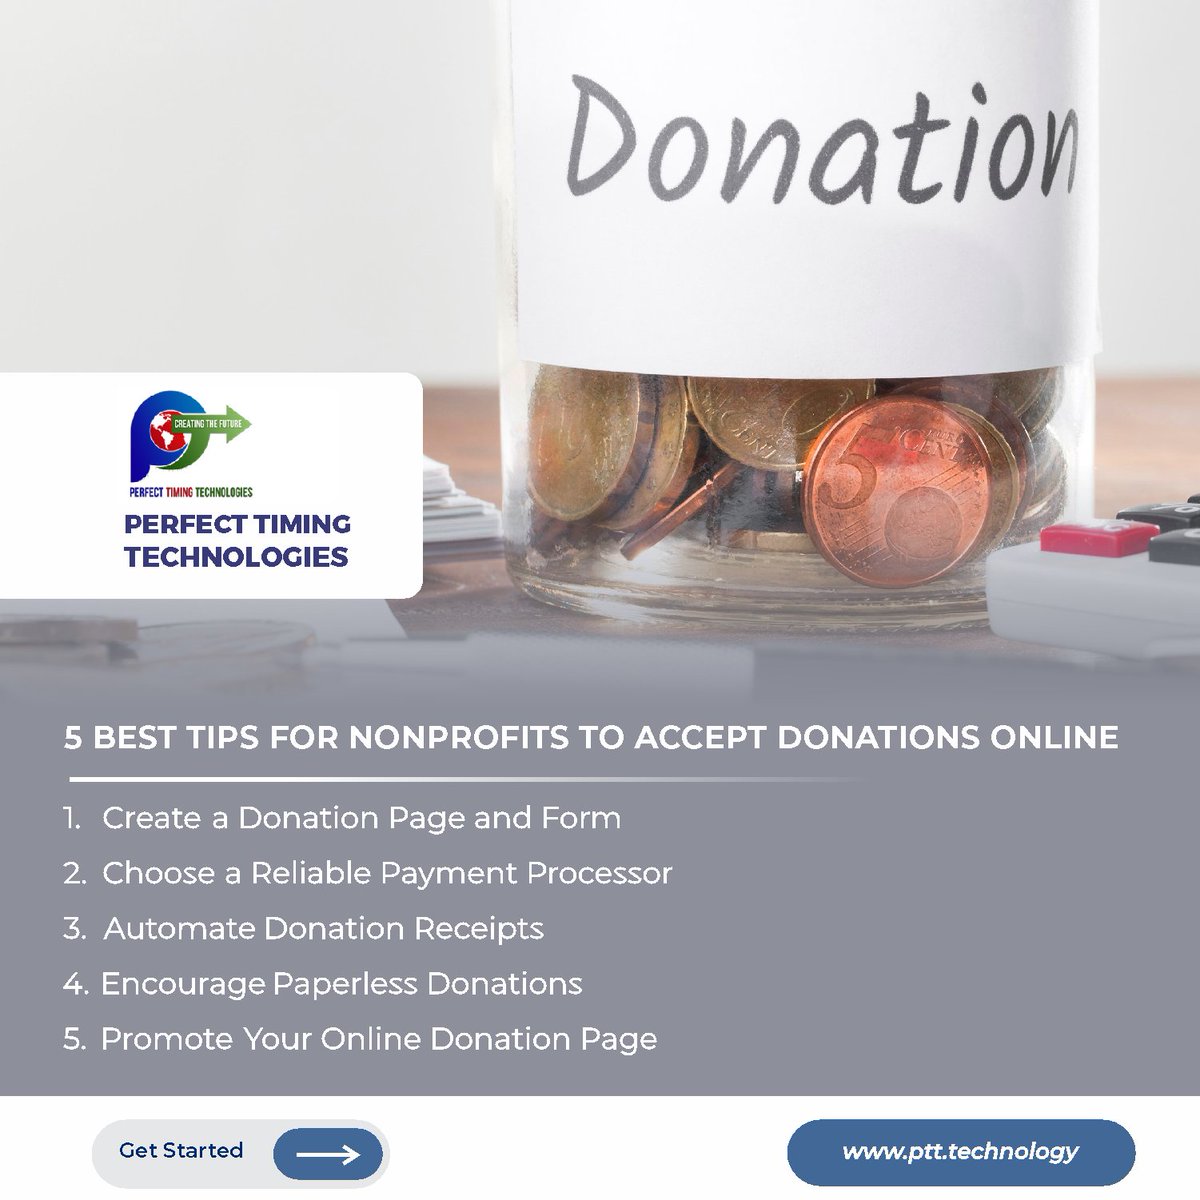 5 Best Tips for Nonprofits to Accept Donations Online

Read here: hostinger.in/tutorials/acce…  

#Nonprofits #Donations #OnlineDonations #Fundraising #Charity #OnlineFundraising #DonationPlatform #DigitalPayments #AcceptingDonations #PerfectTimingTechnology #PerfectTimingHolding